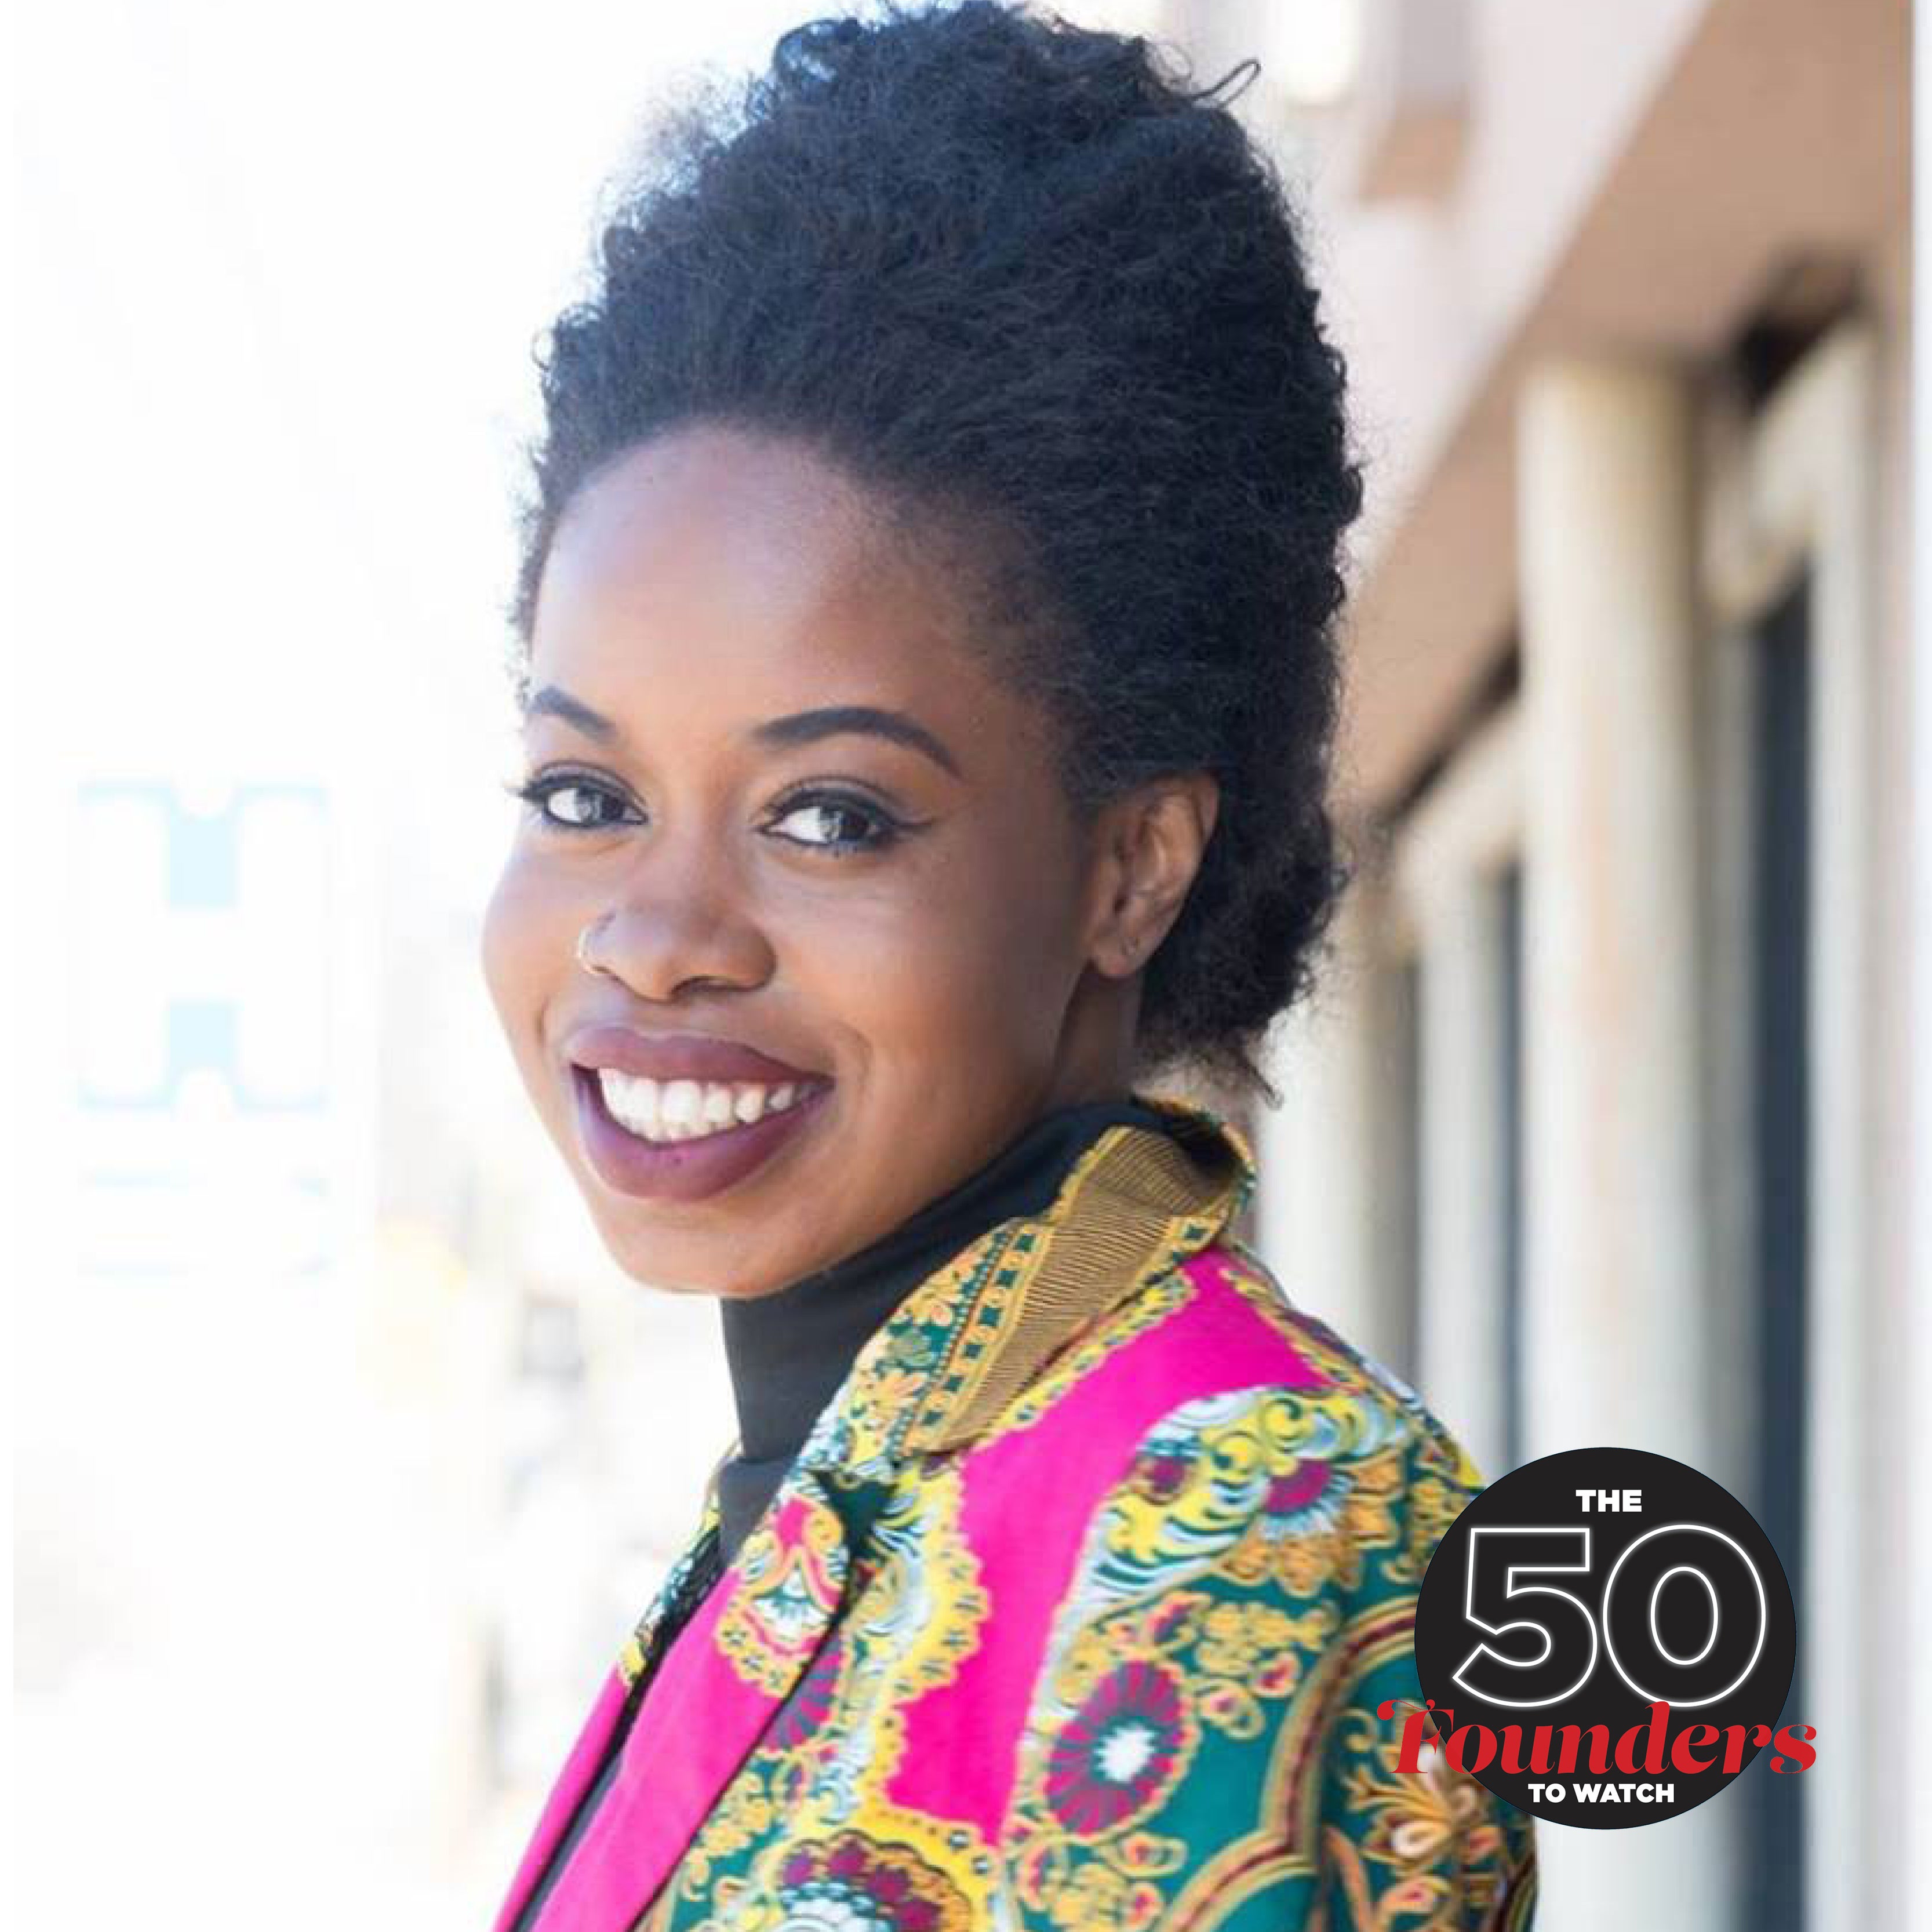 ESSENCE 50: Zuvaa Founder Kelechi Anyadiegwu Says Removing Negative People From Your Life Will Help You Thrive
